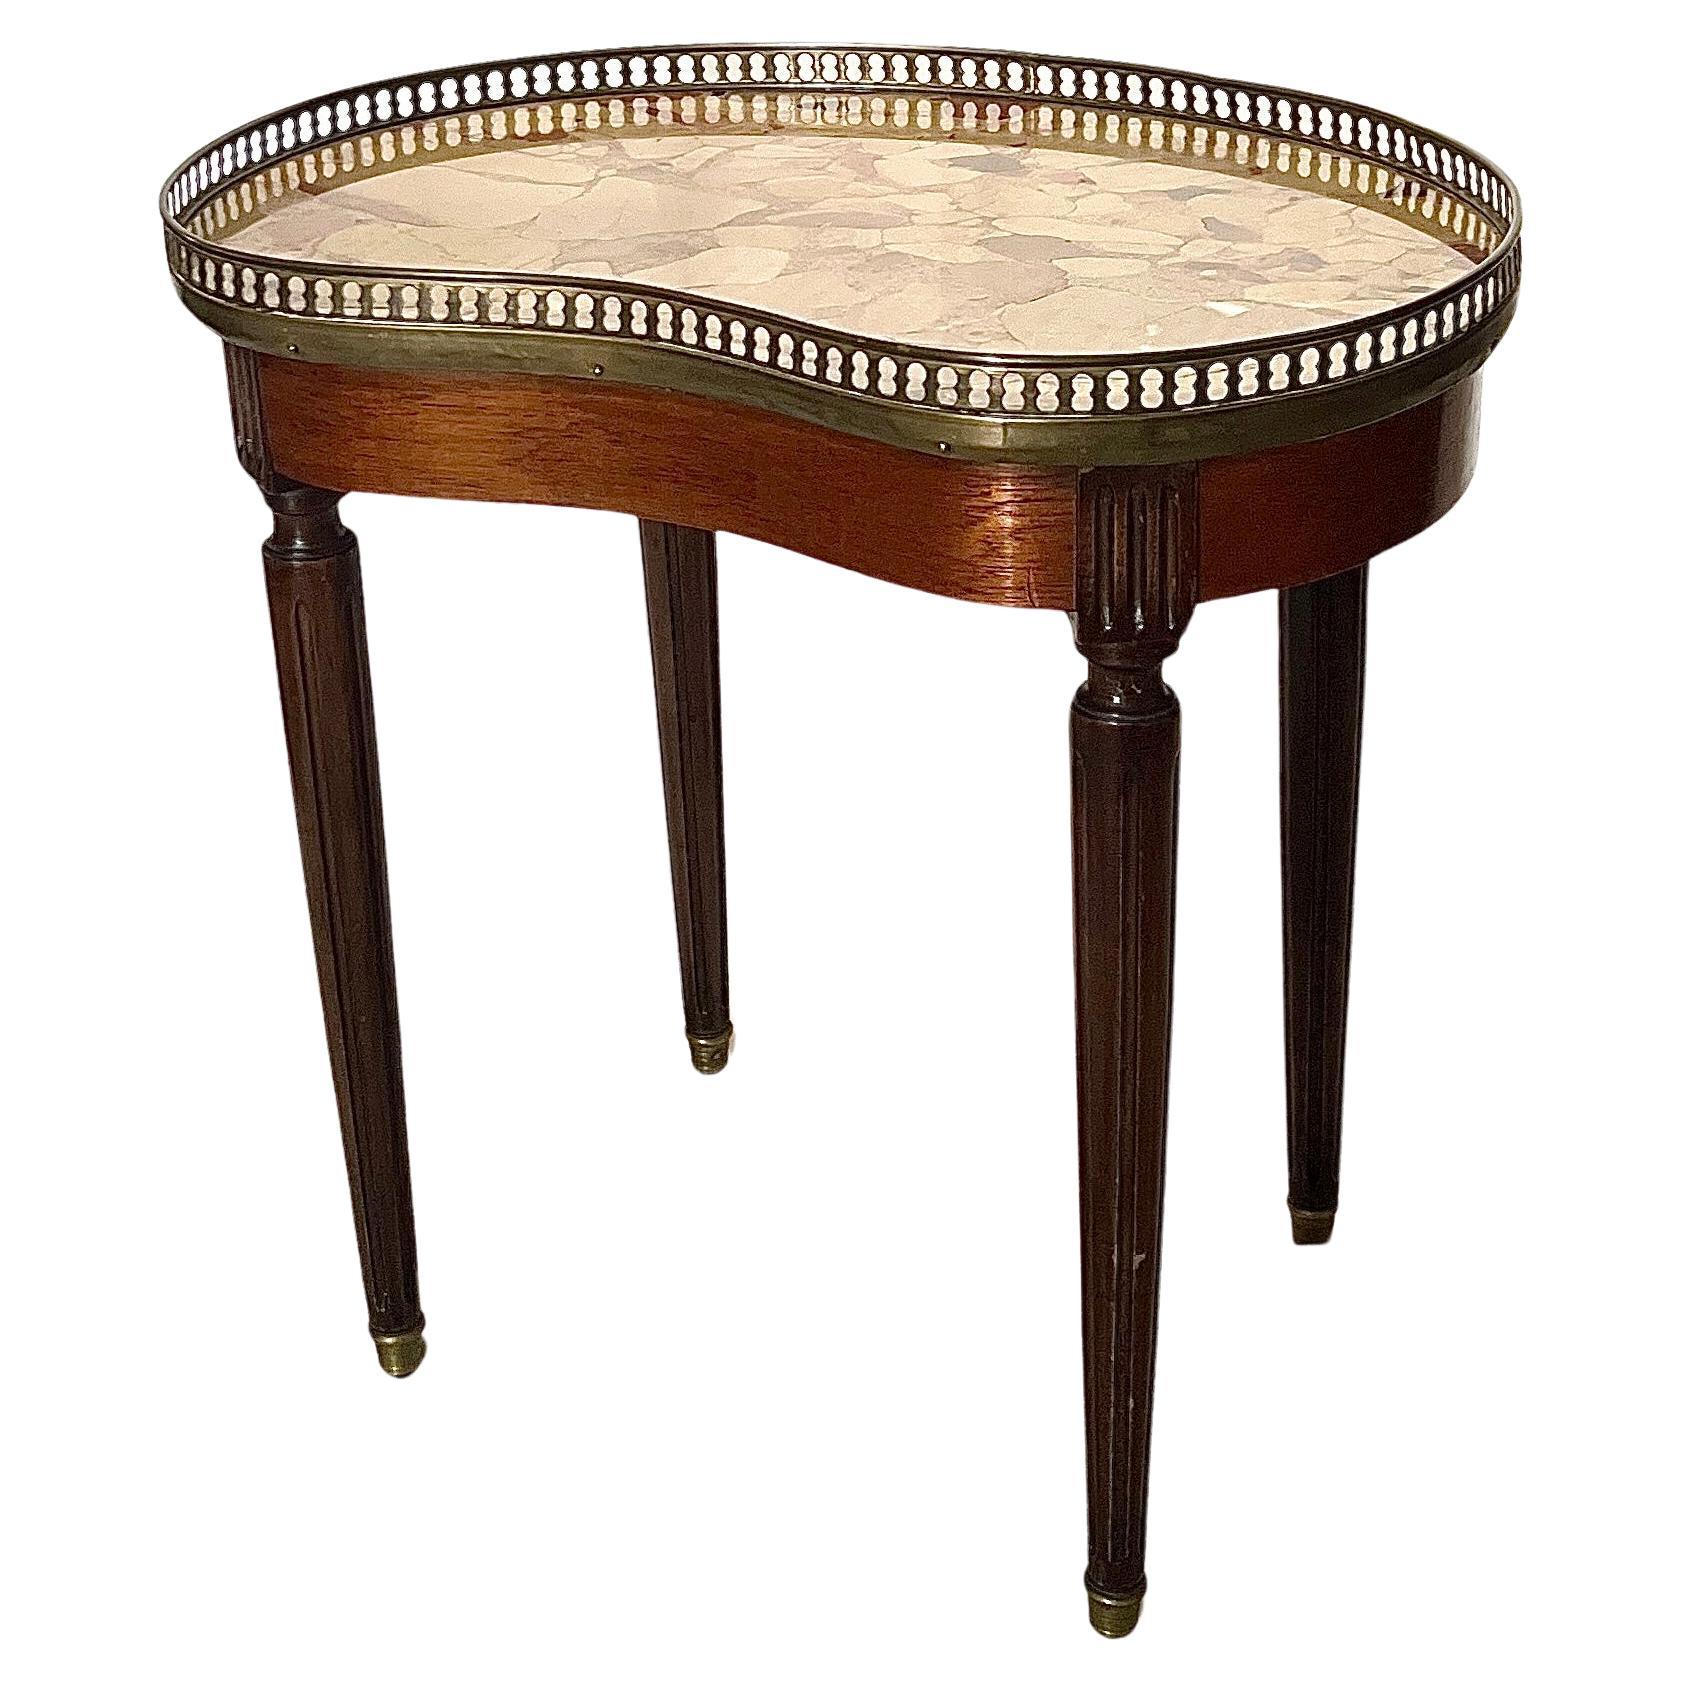 20th Century Antique French Marble Top Kidney Shaped Table, Circa 1910-1920. For Sale